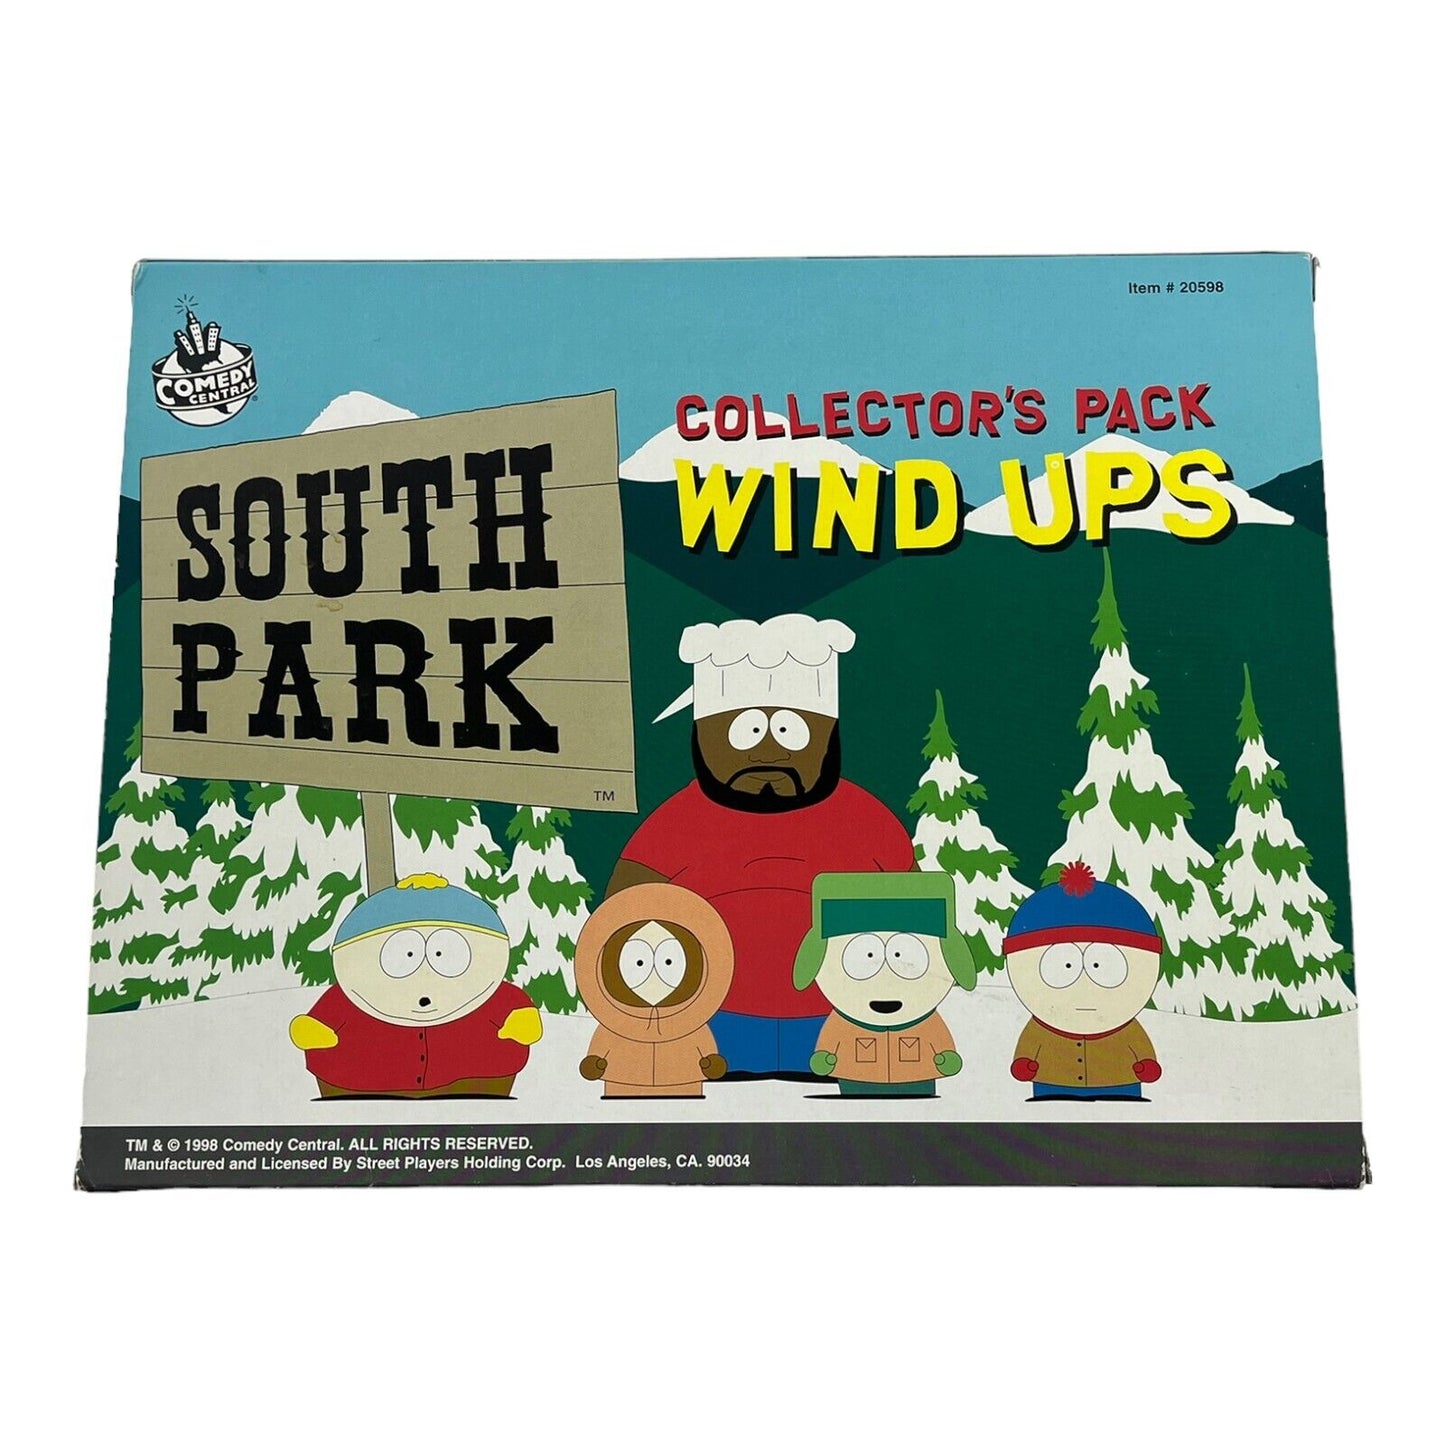 South Park Collector's Pack Vintage Wind Ups 1998 Street Players